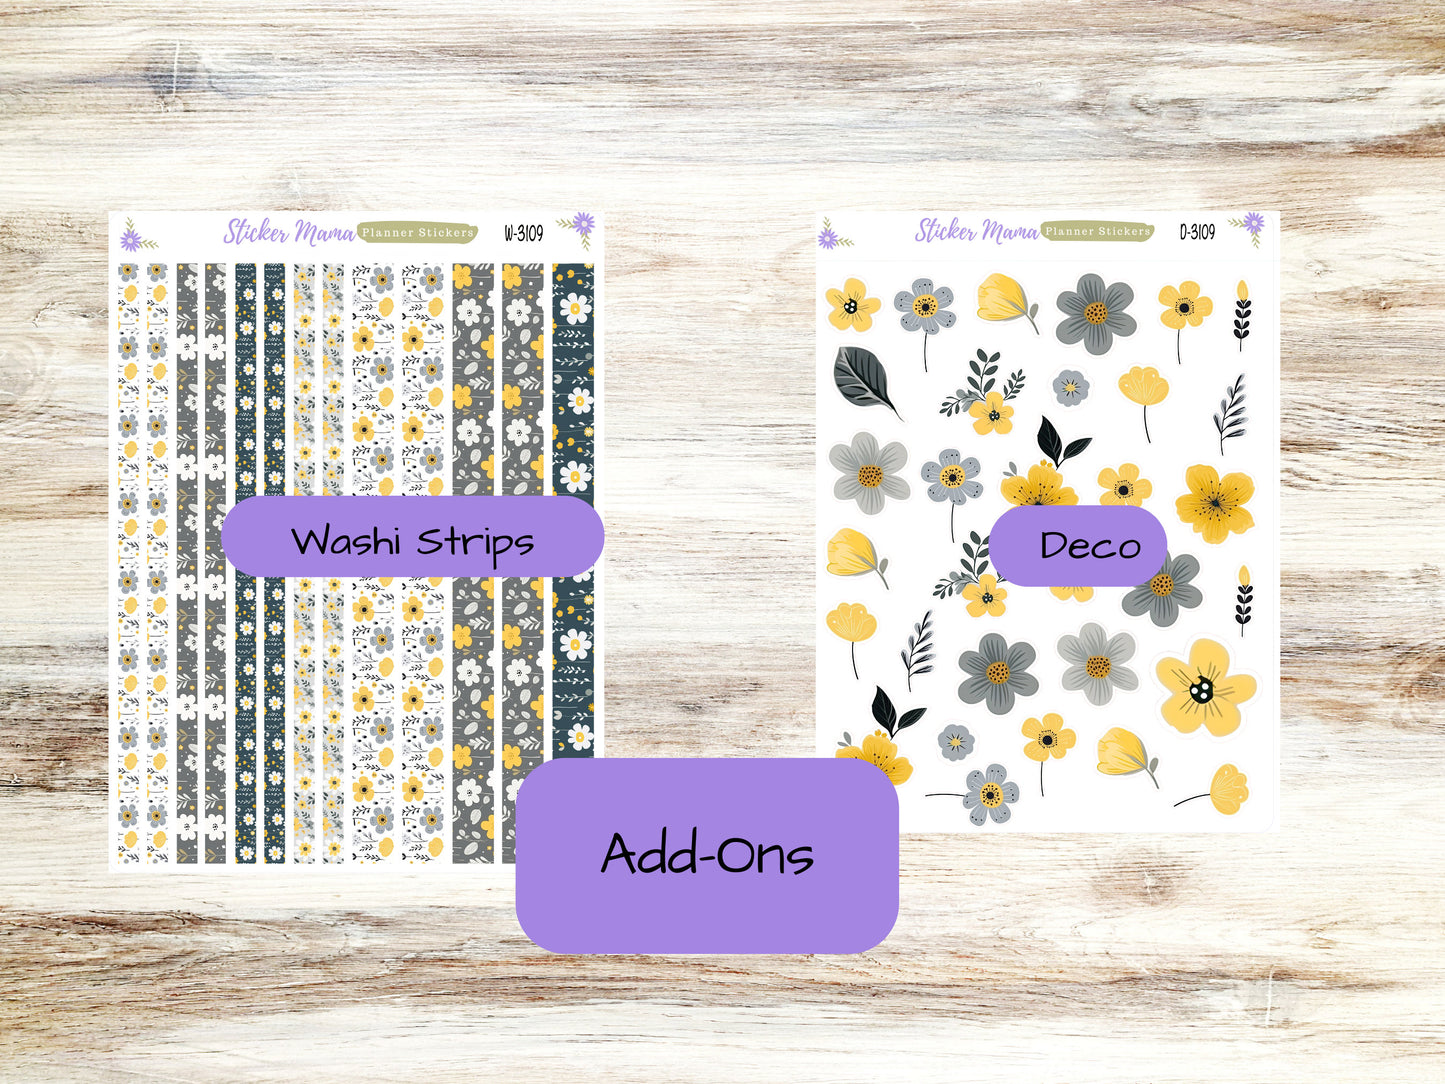 SIMPLE KIT  || #3109 || Grey and Yellow Floral  || Any Kind Planner || Planner Stickers || Planner Stickers